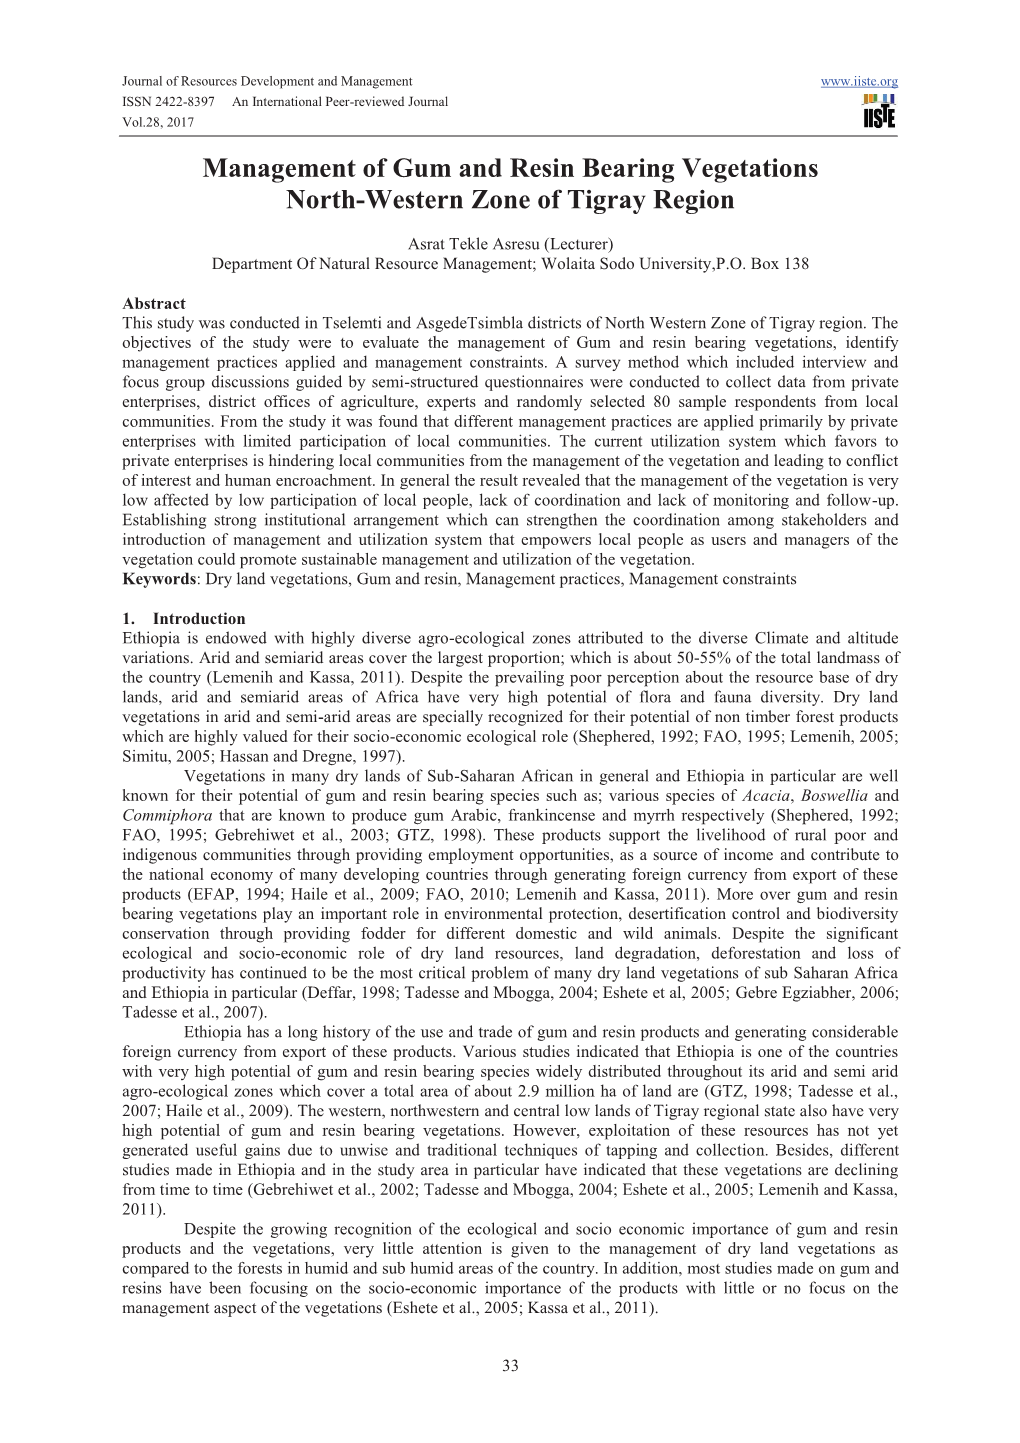 Management of Gum and Resin Bearing Vegetations North-Western Zone of Tigray Region